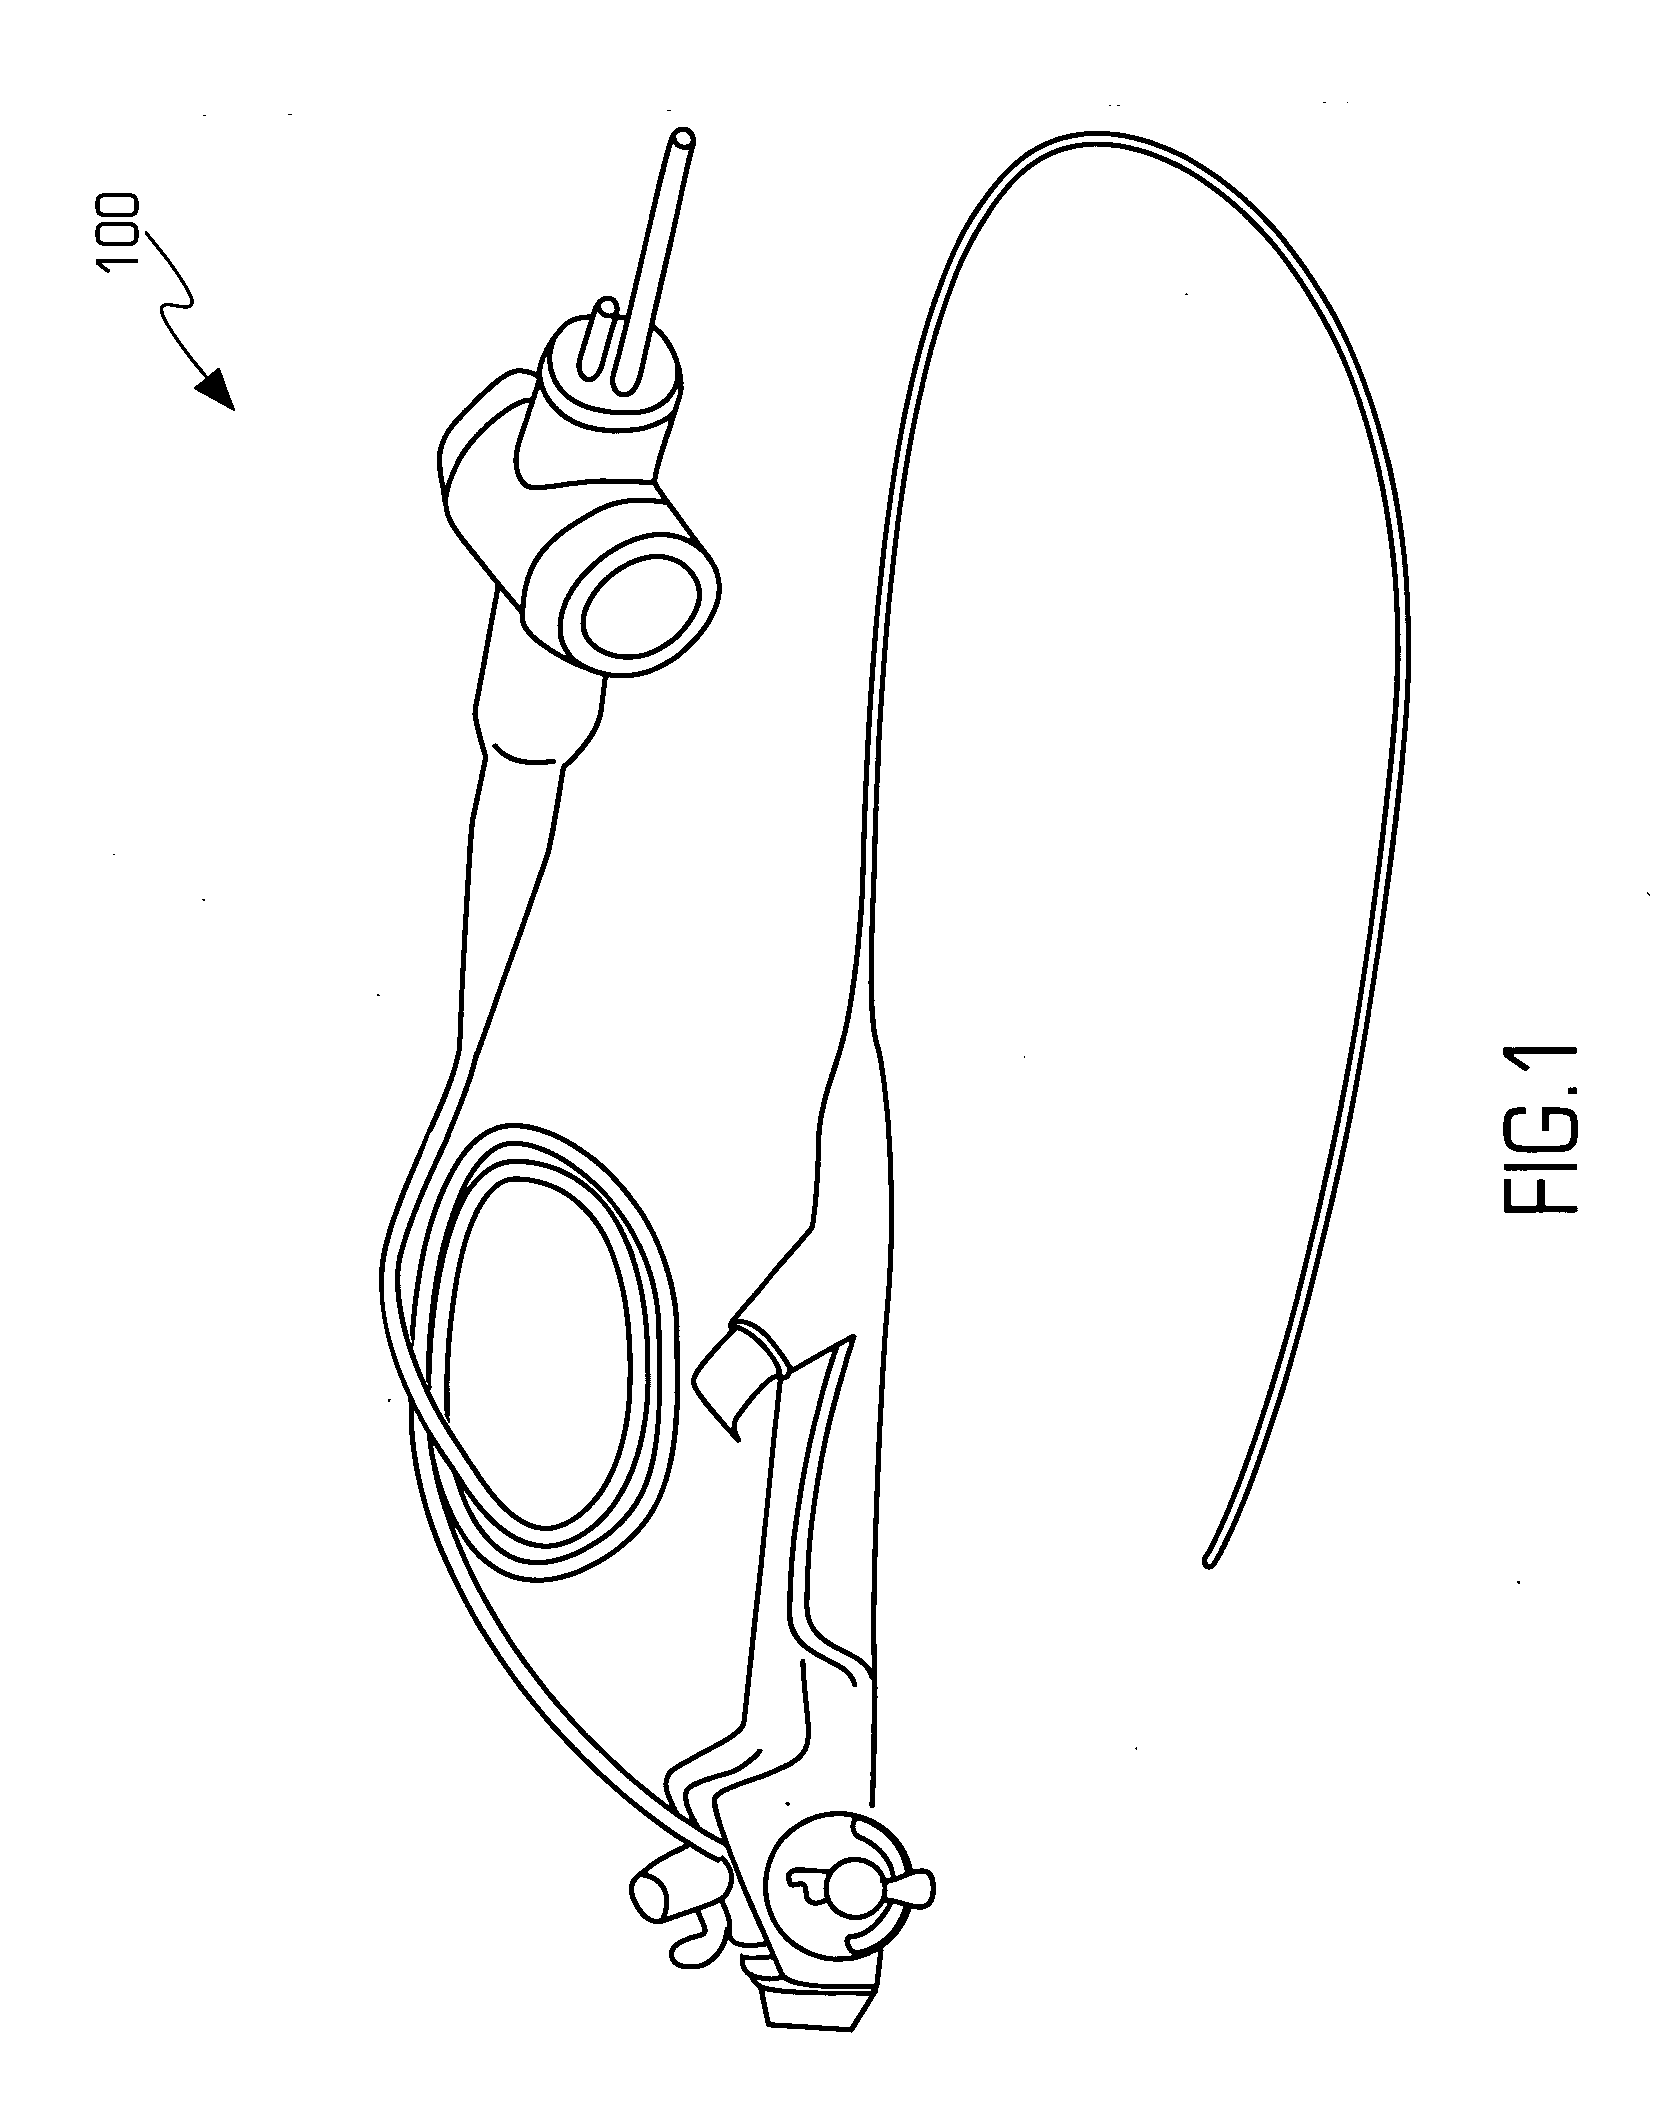 Method and apparatus for the treatment of respiratory and other infections using ultraviolet germicidal irradiation